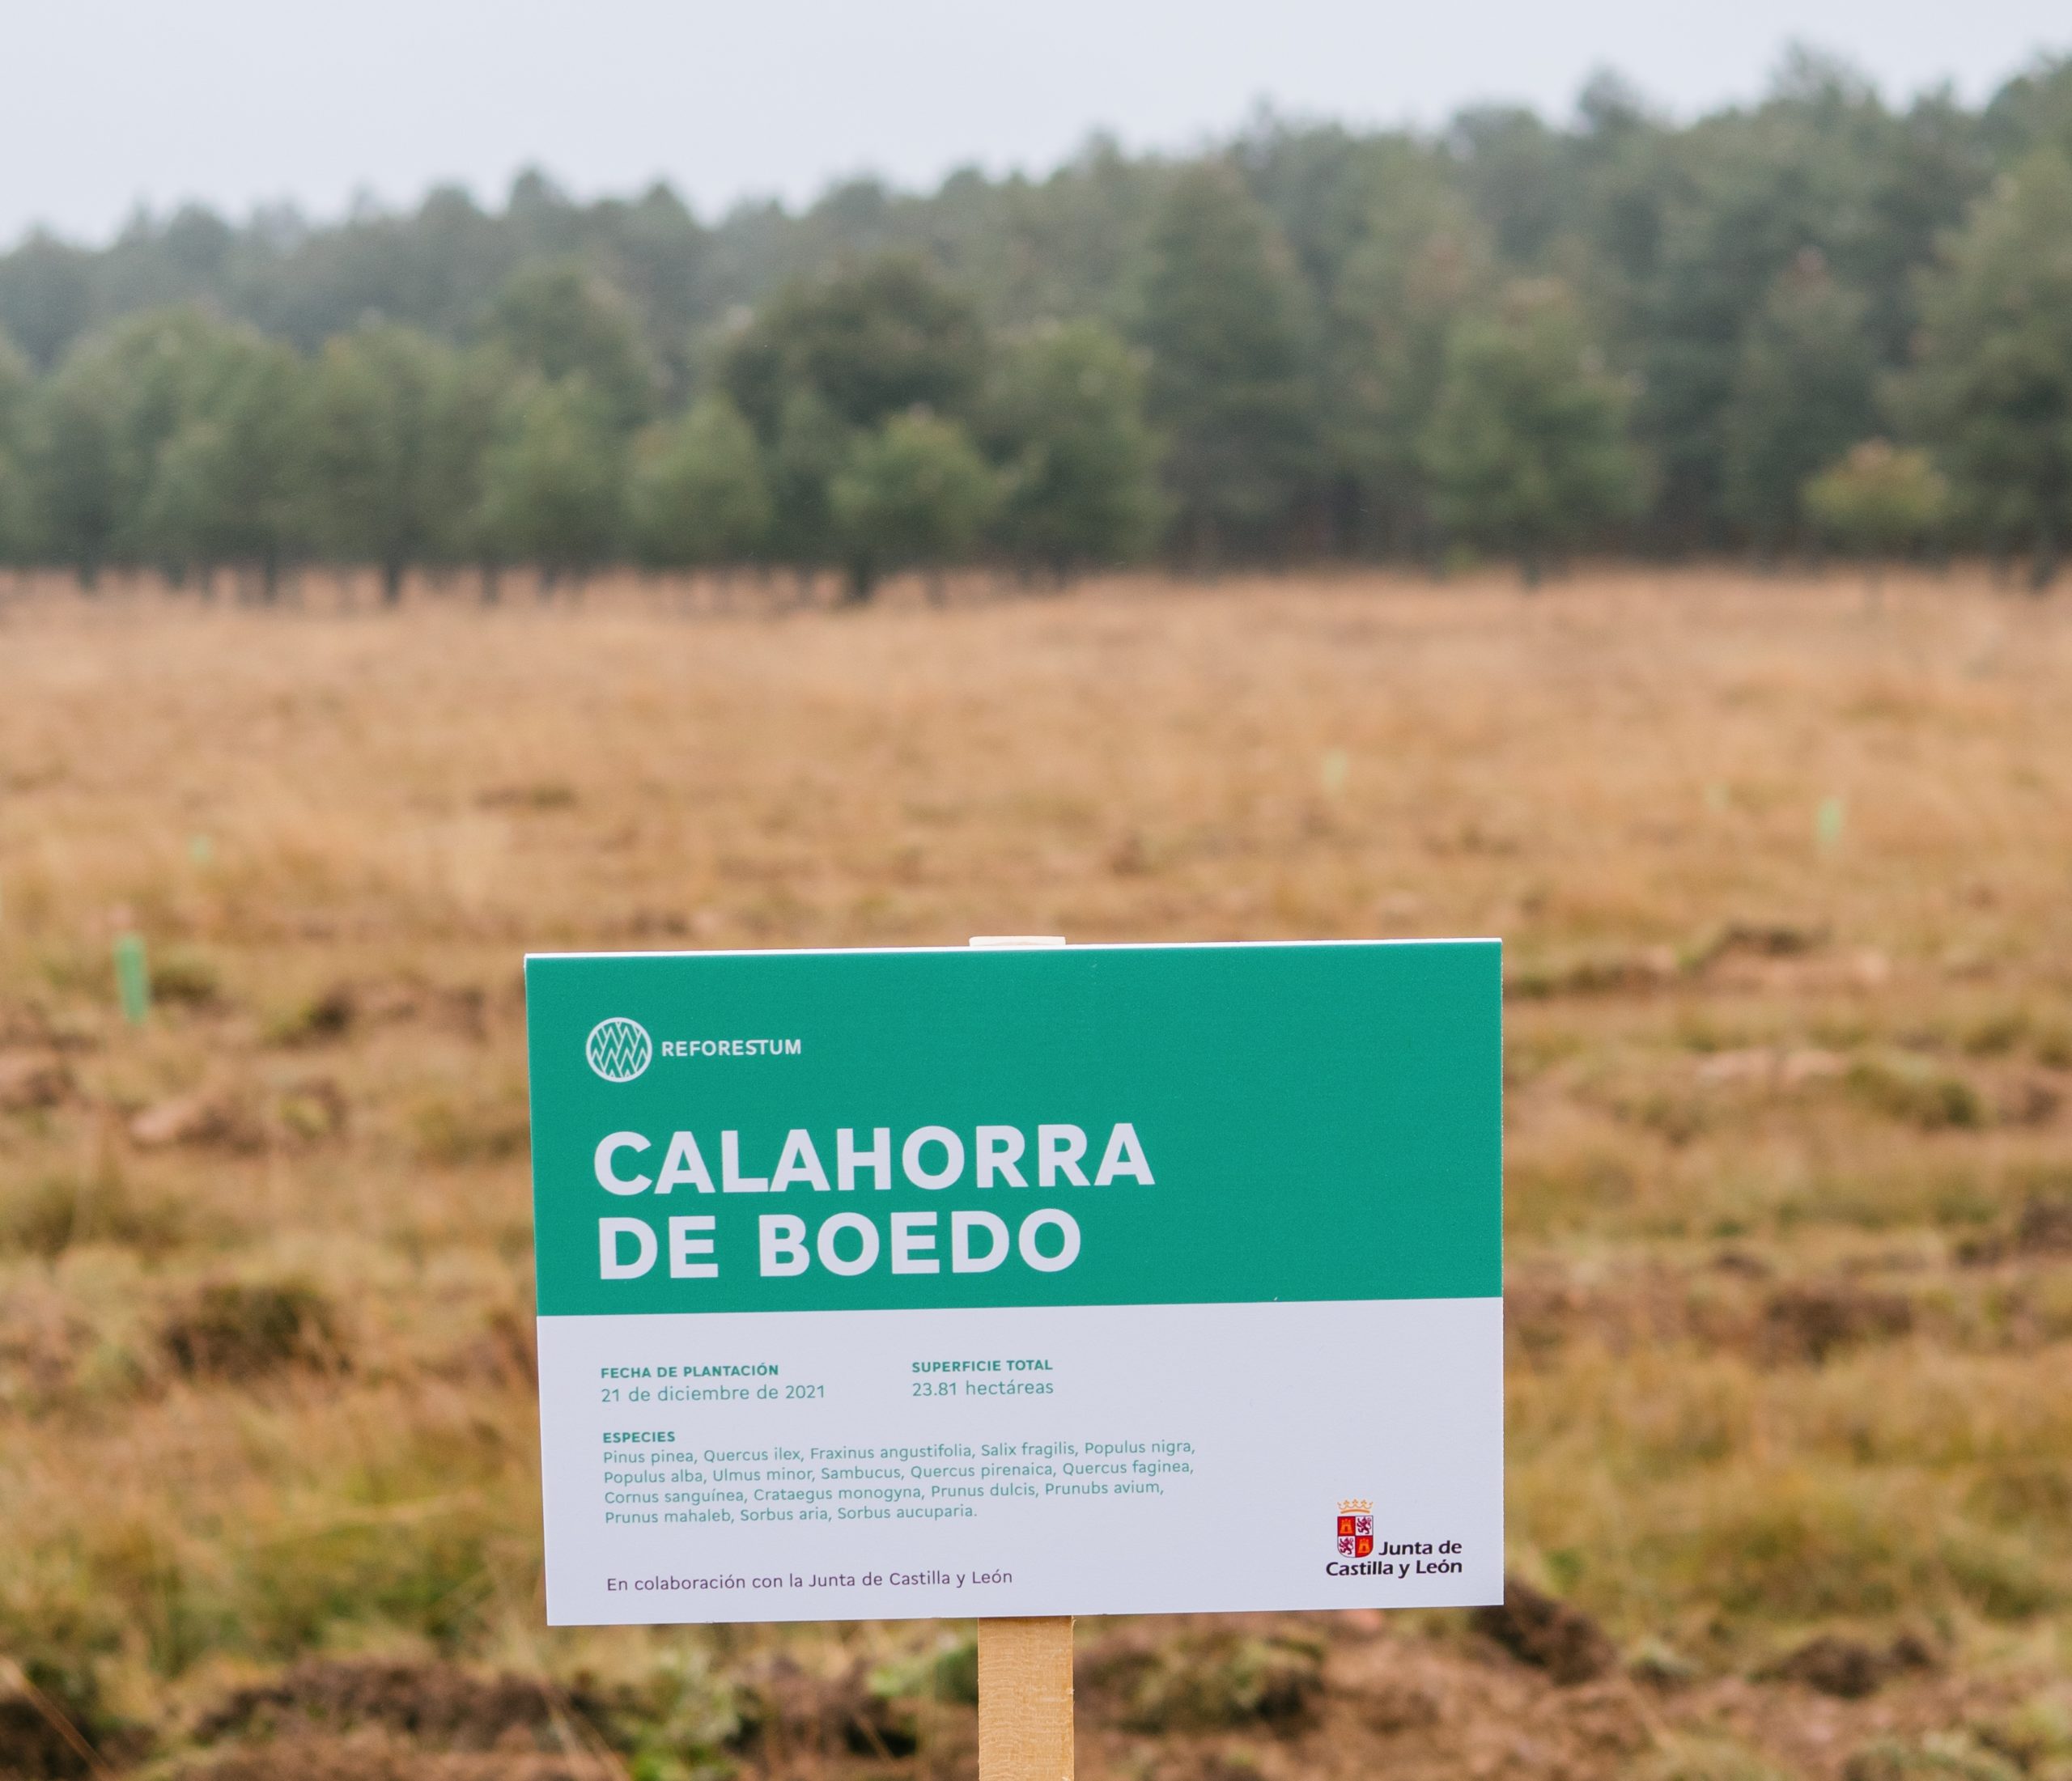 Spanish sign indicating a new forest has been planted